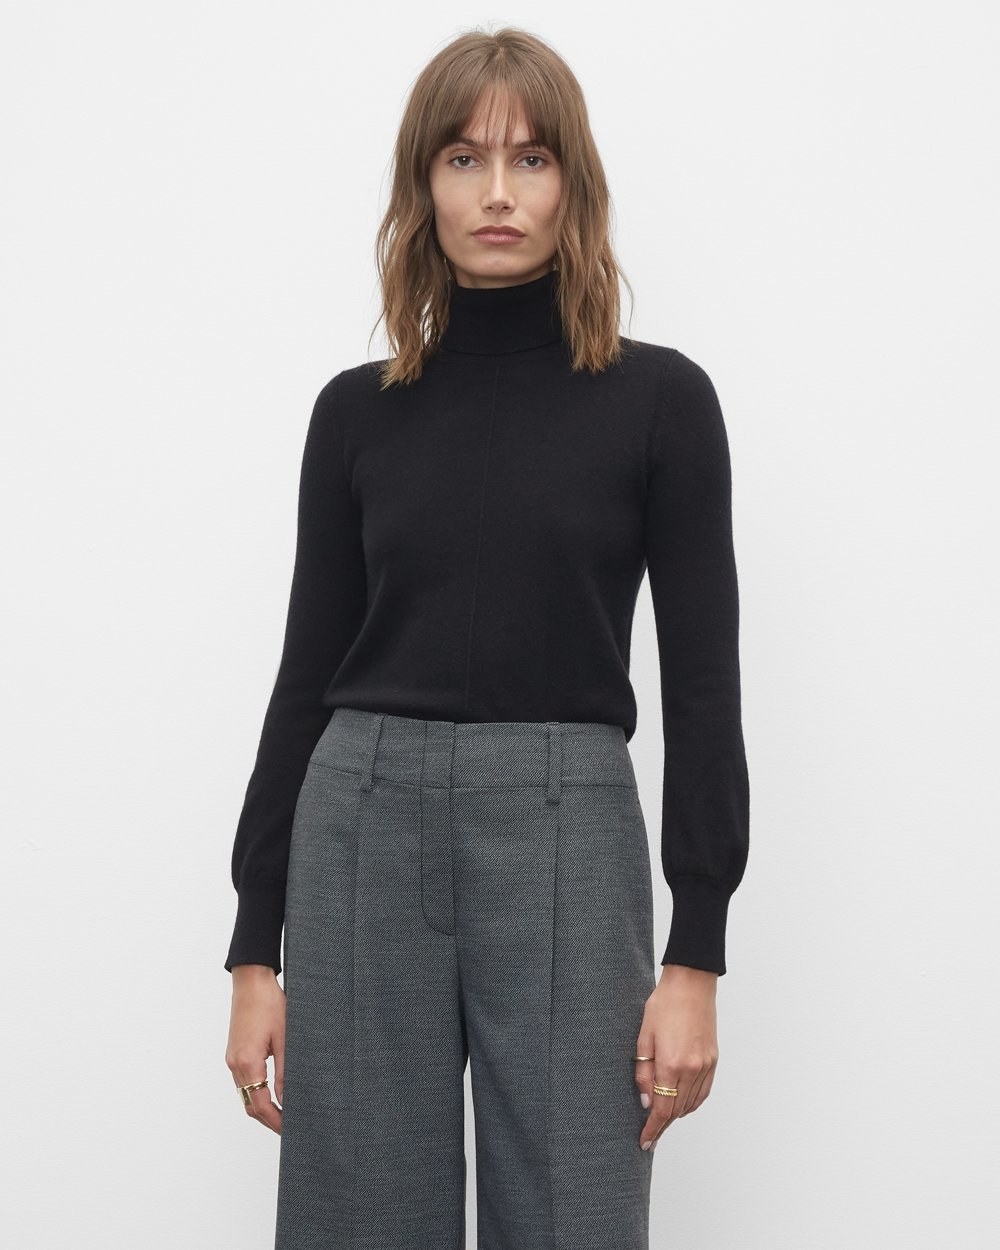 A person wearing a turtleneck with work pants